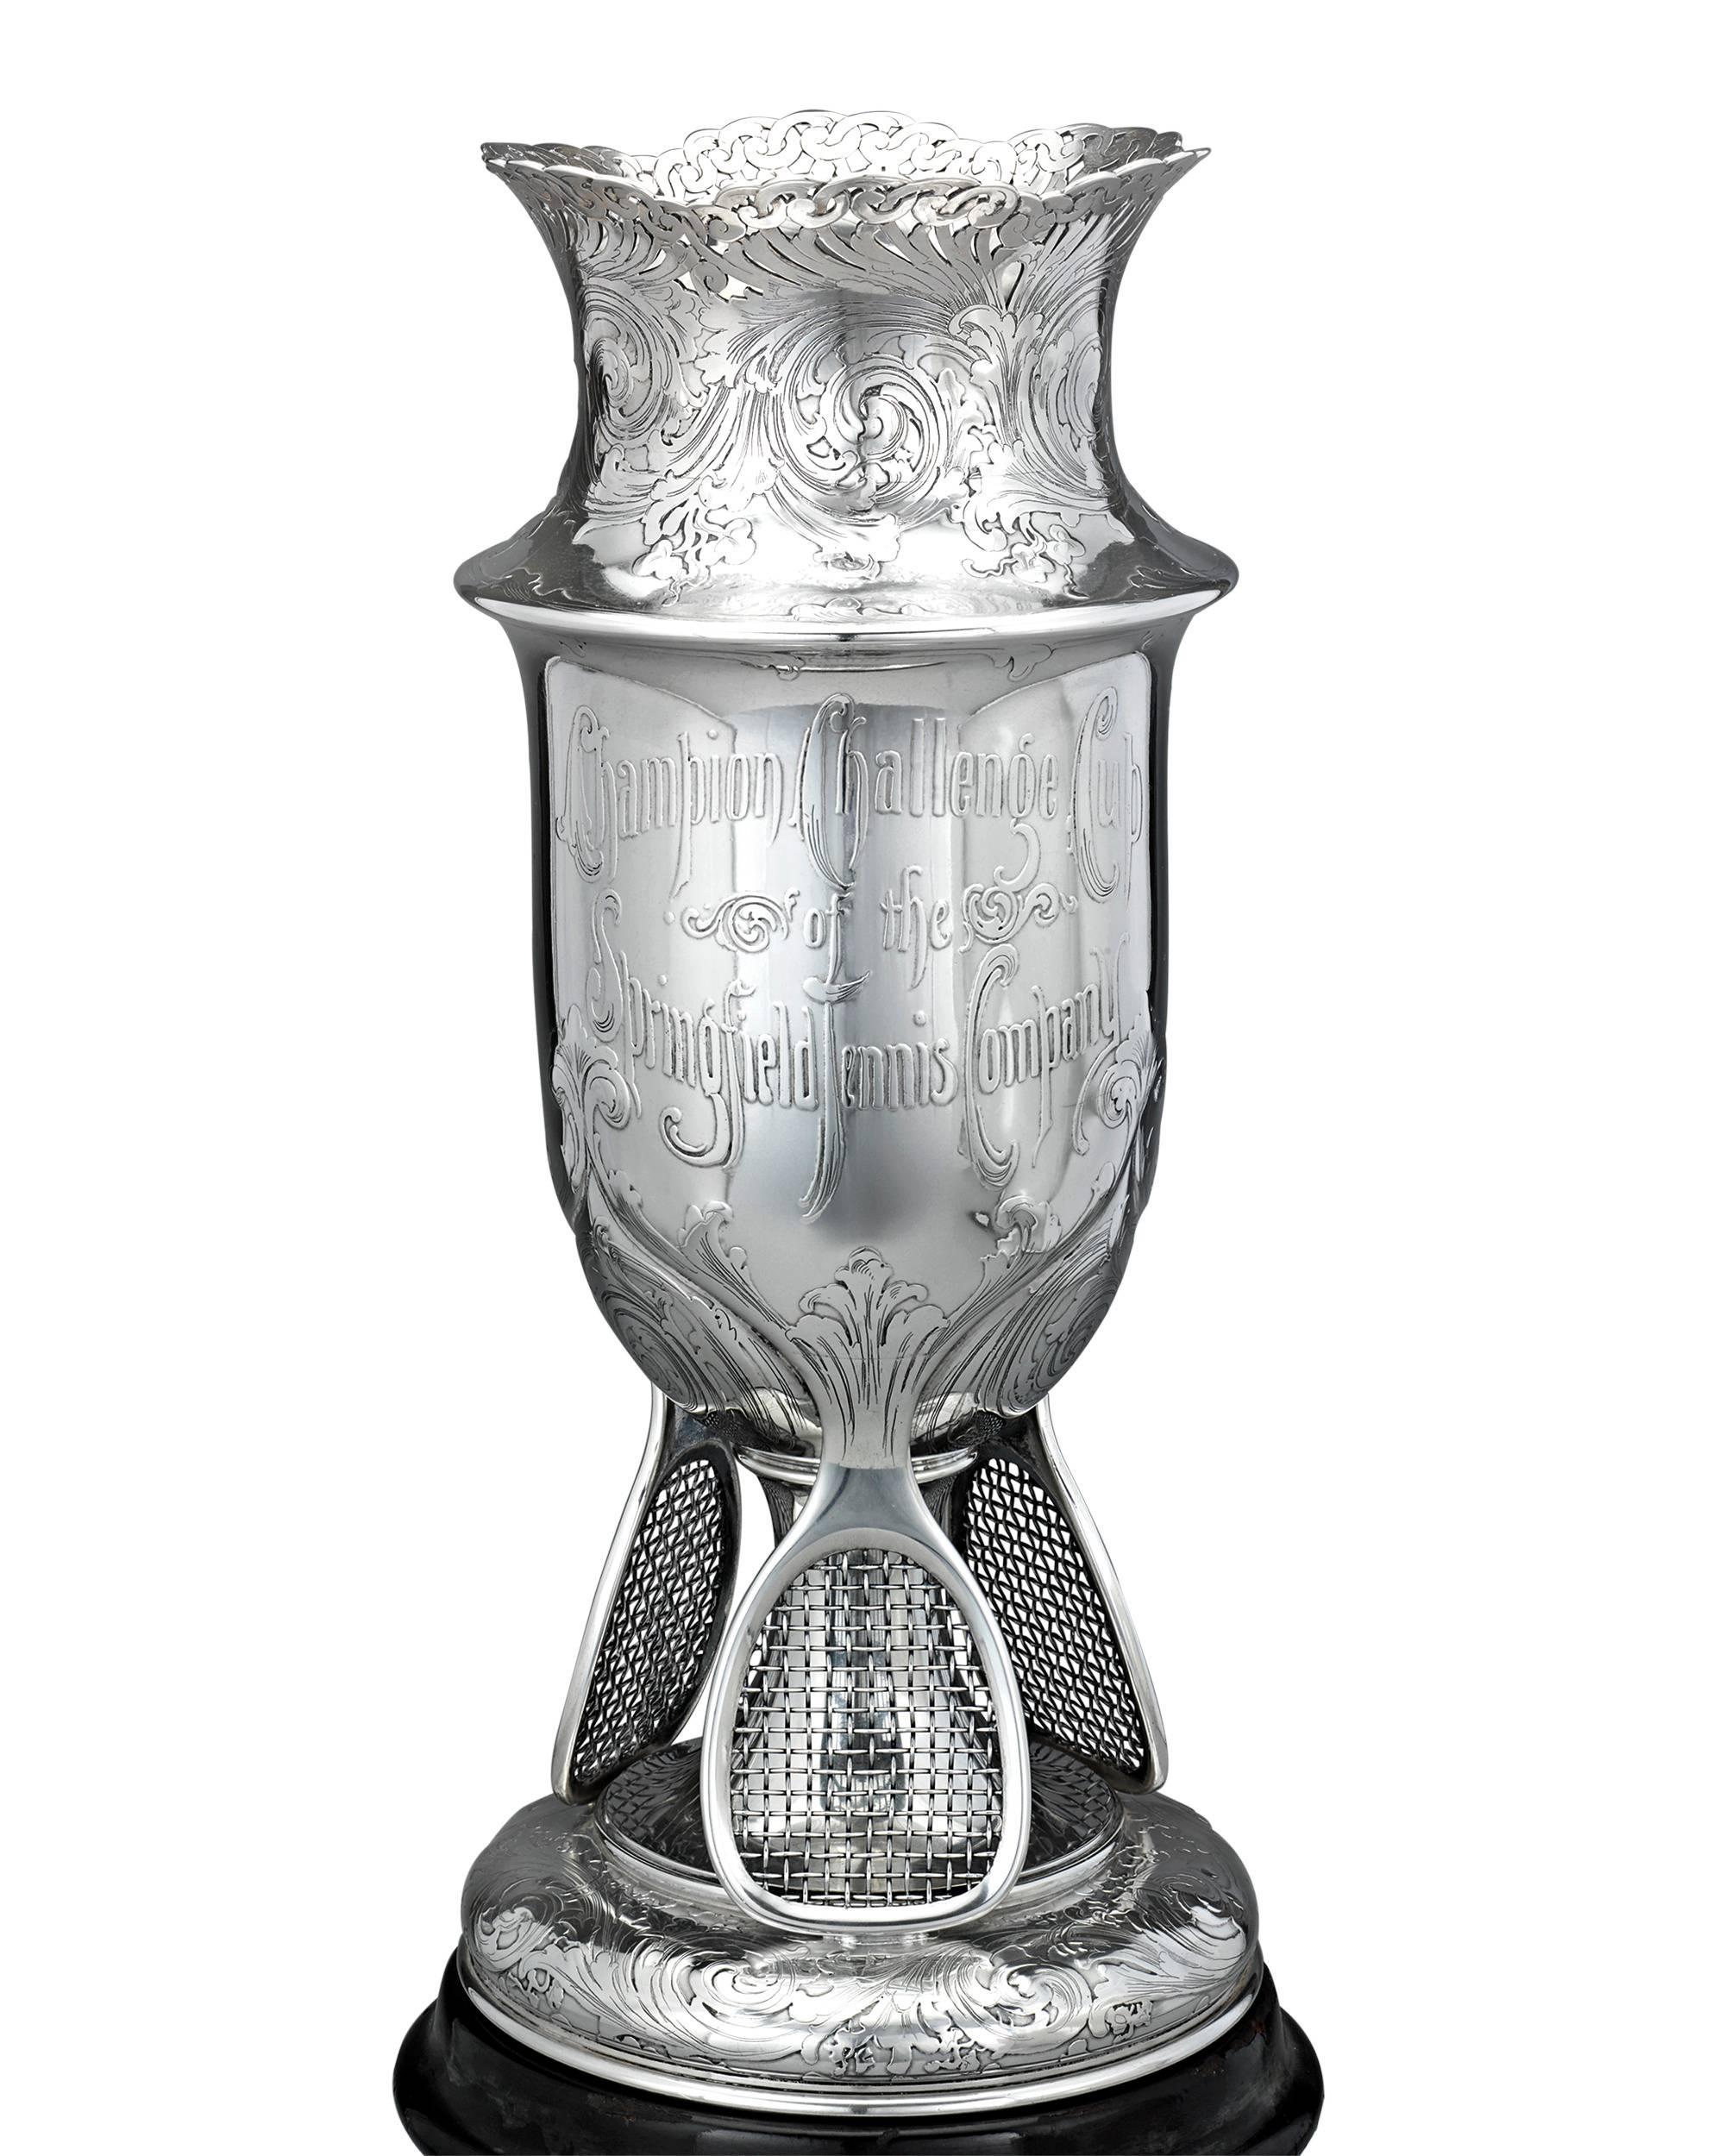 This magnificent sterling silver trophy cup was crafted by the imitable Tiffany & Co. and presented to Frederick H. Gillett, a Massachusetts Senator and four-time winner of the Champion Challenge Cup of the Springfield Tennis Company. The urn-form